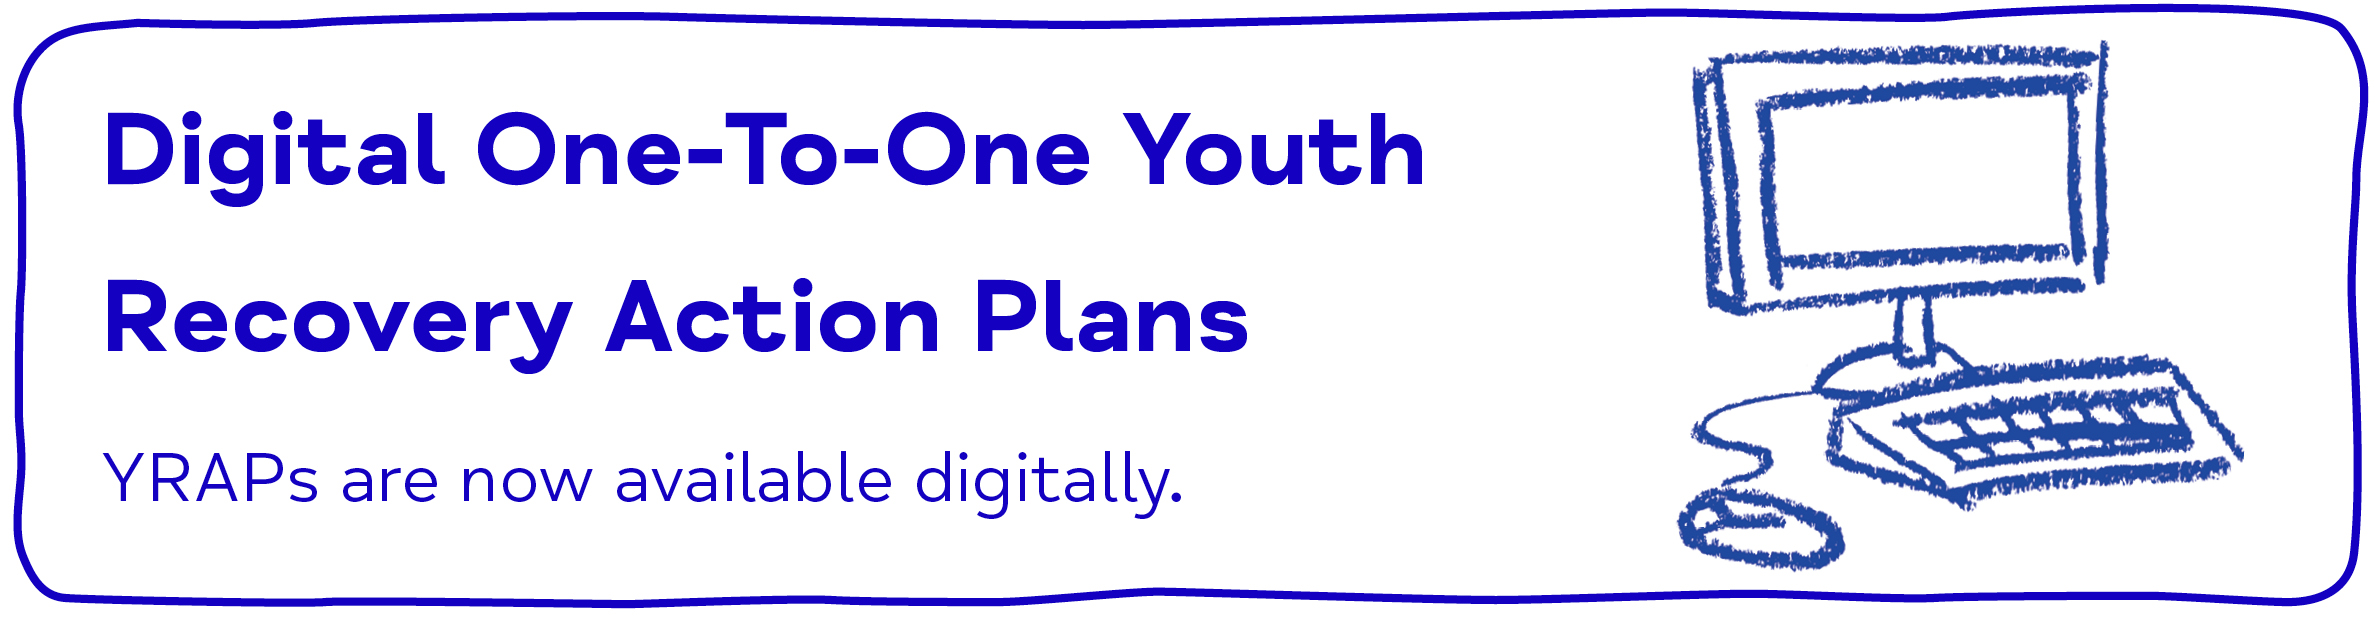 Digital One-To-One Youth Recovery Action Plans. YRAPs will now be available digitally. 